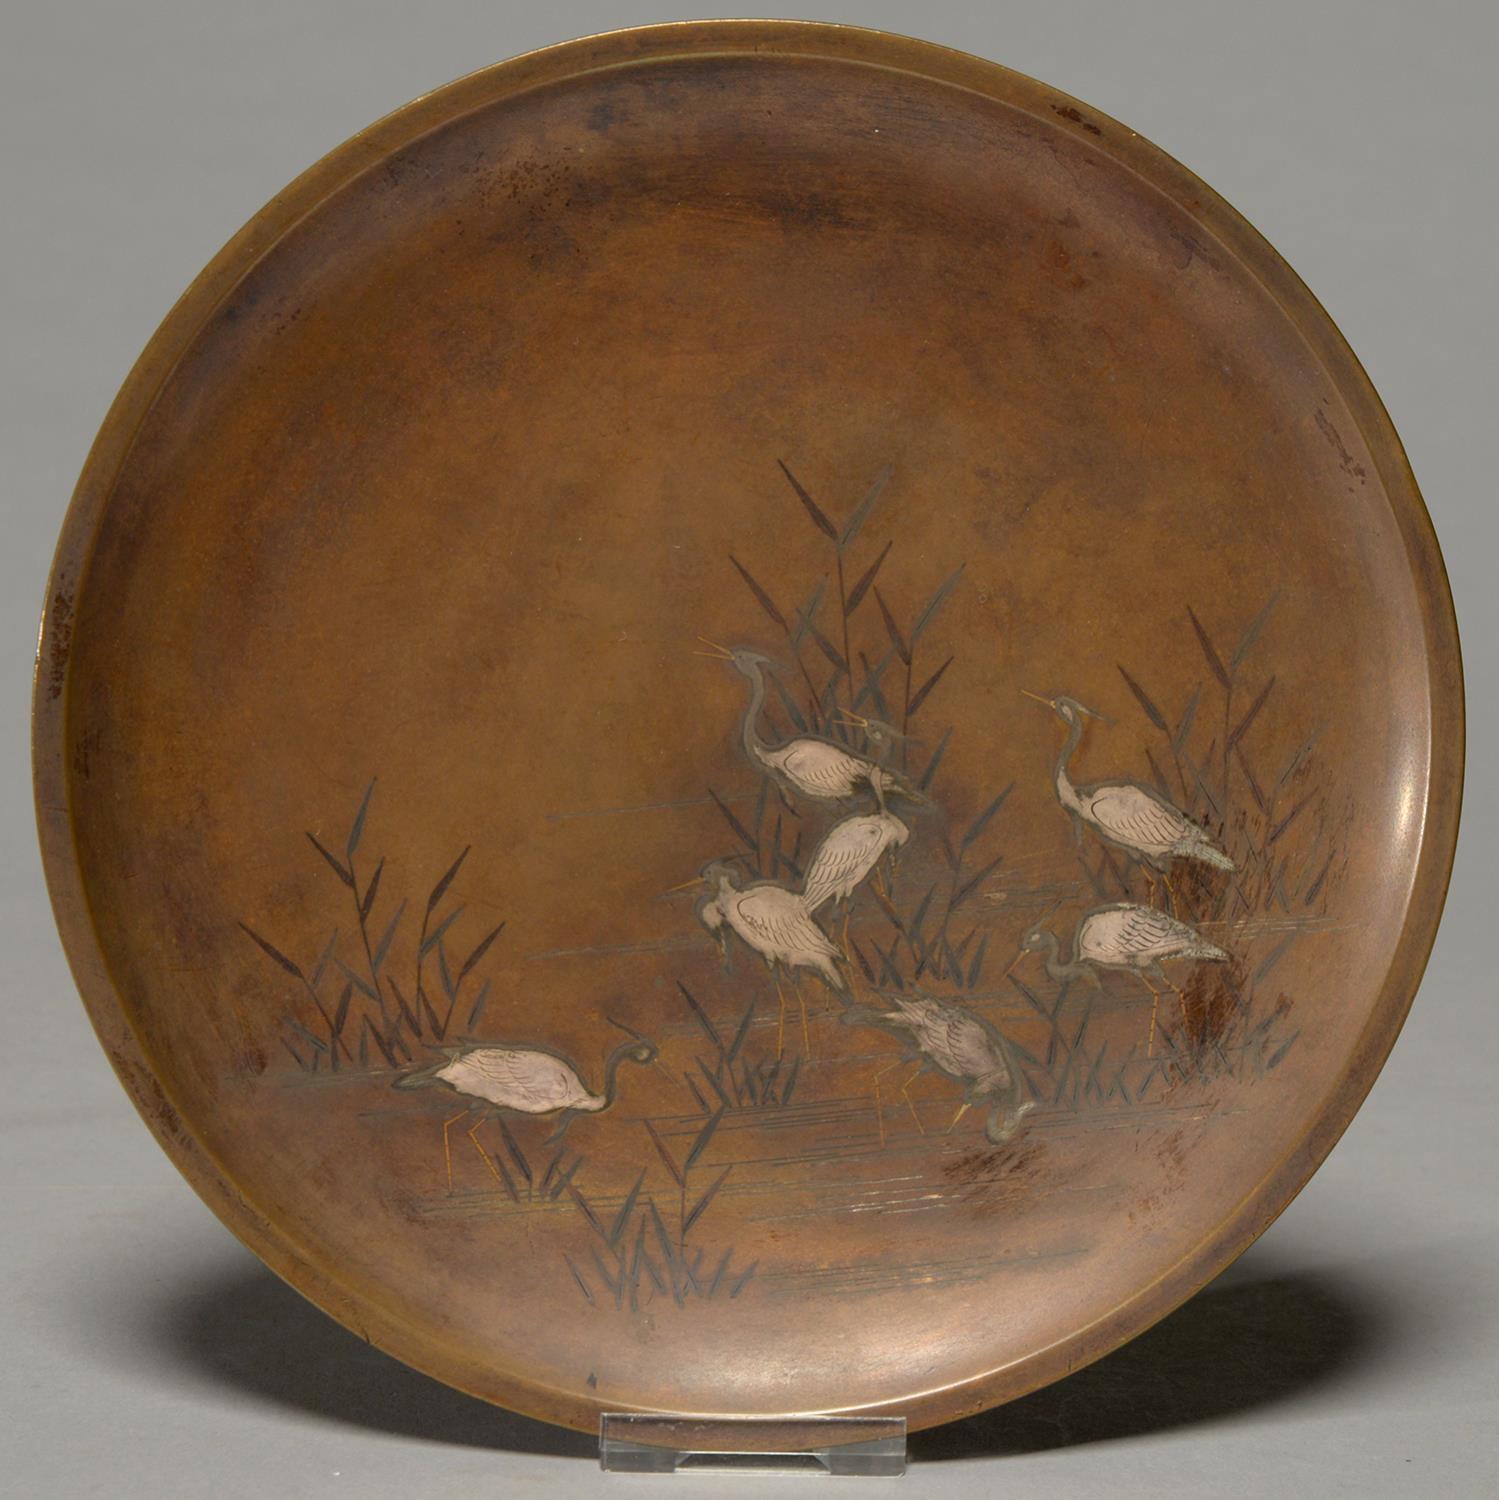 A JAPANESE INLAID BRONZE DISH, MEIJI PERIOD, FINELY DECORATED IN SILVER, GOLD AND SHIBUICHI WITH